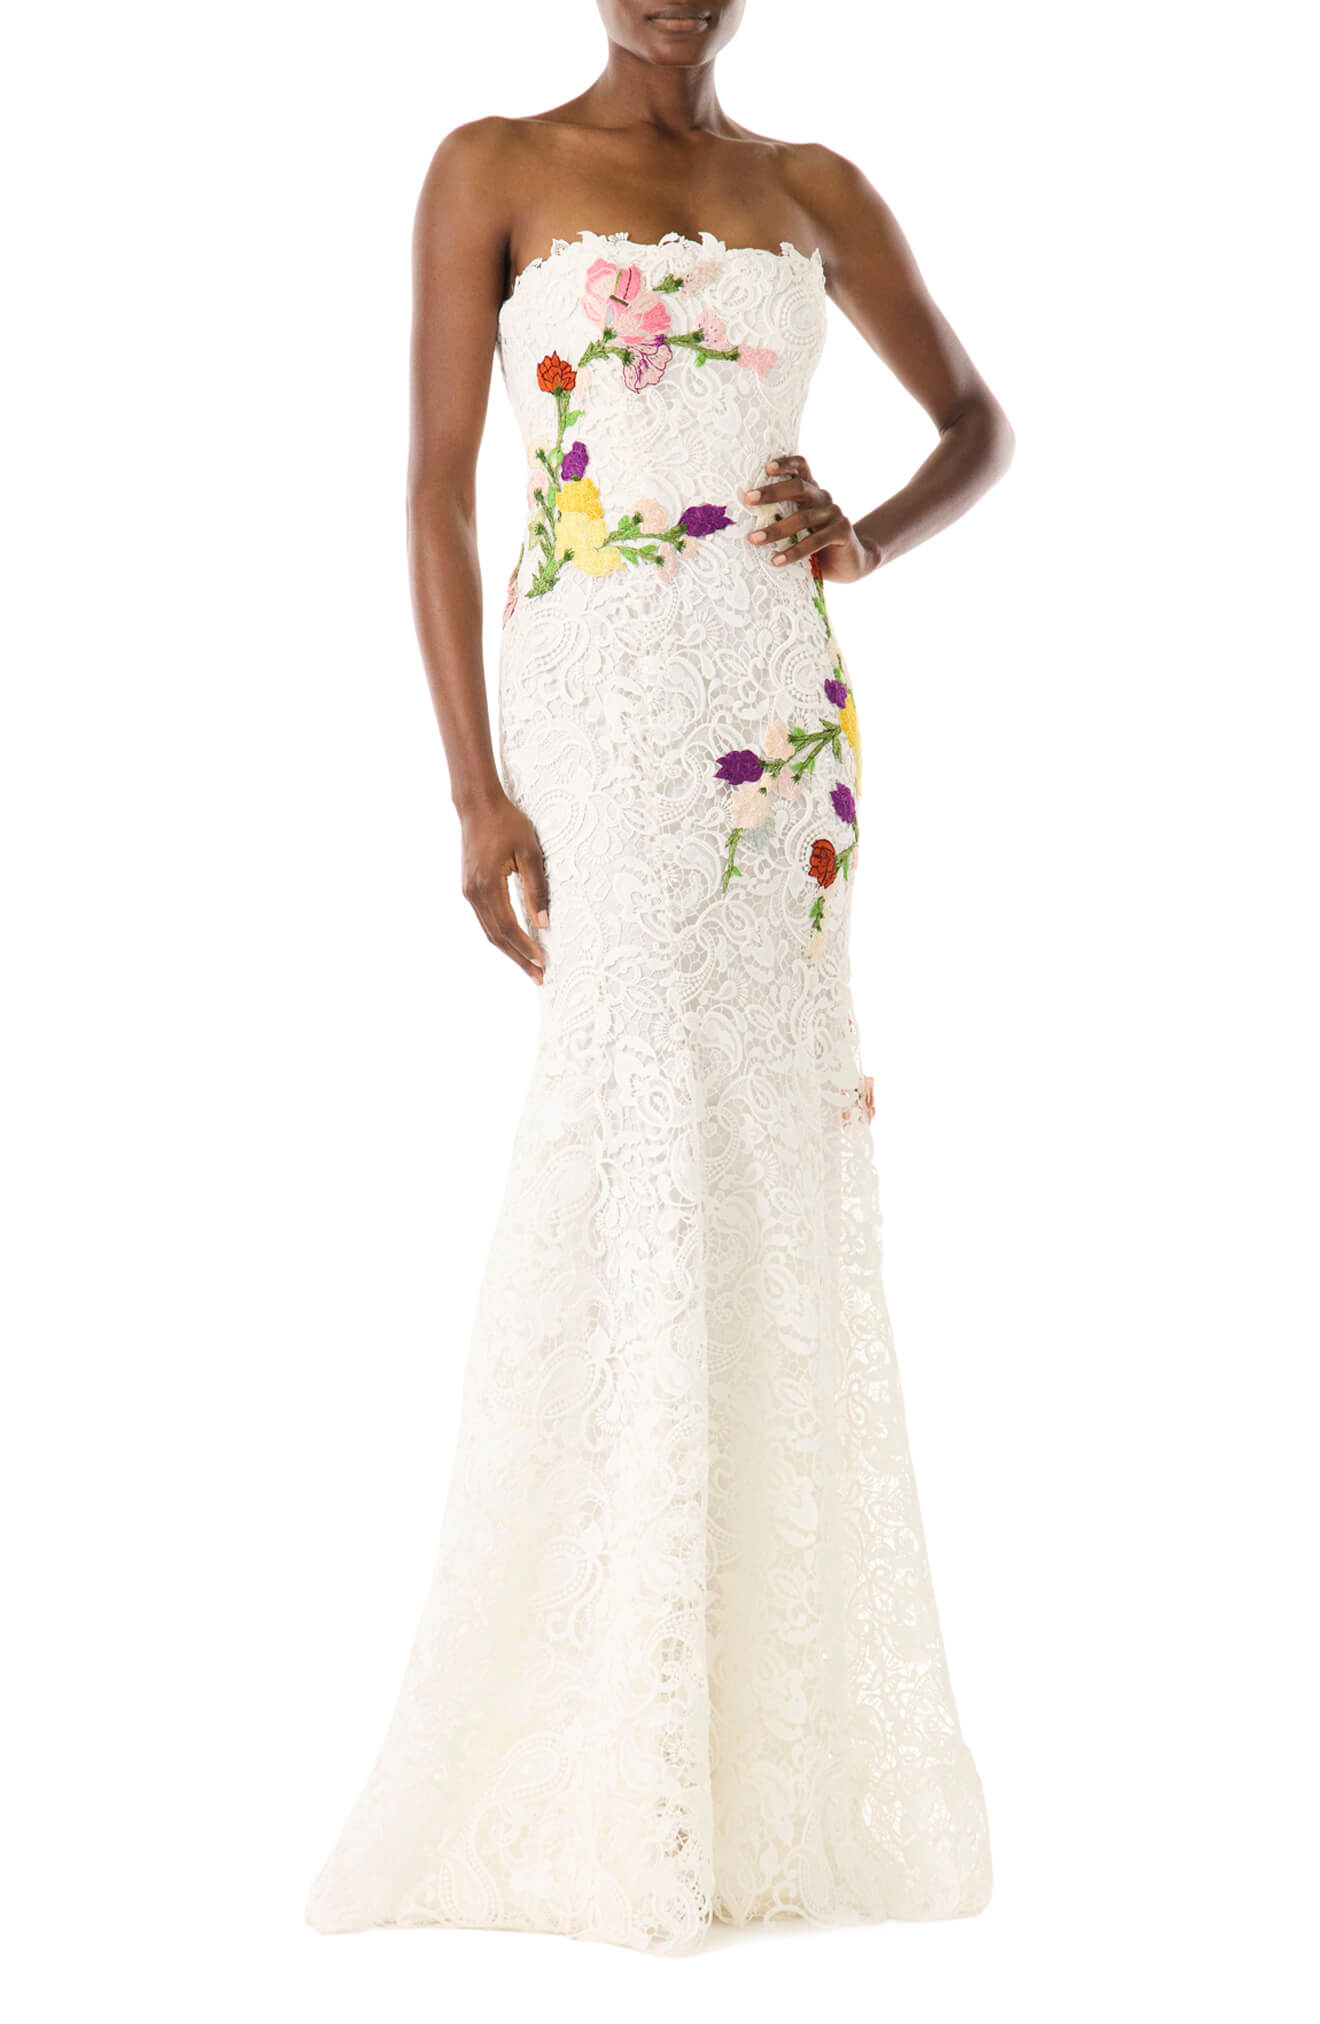 Monique Lhuillier white lace strapless gown with floral embroidery.